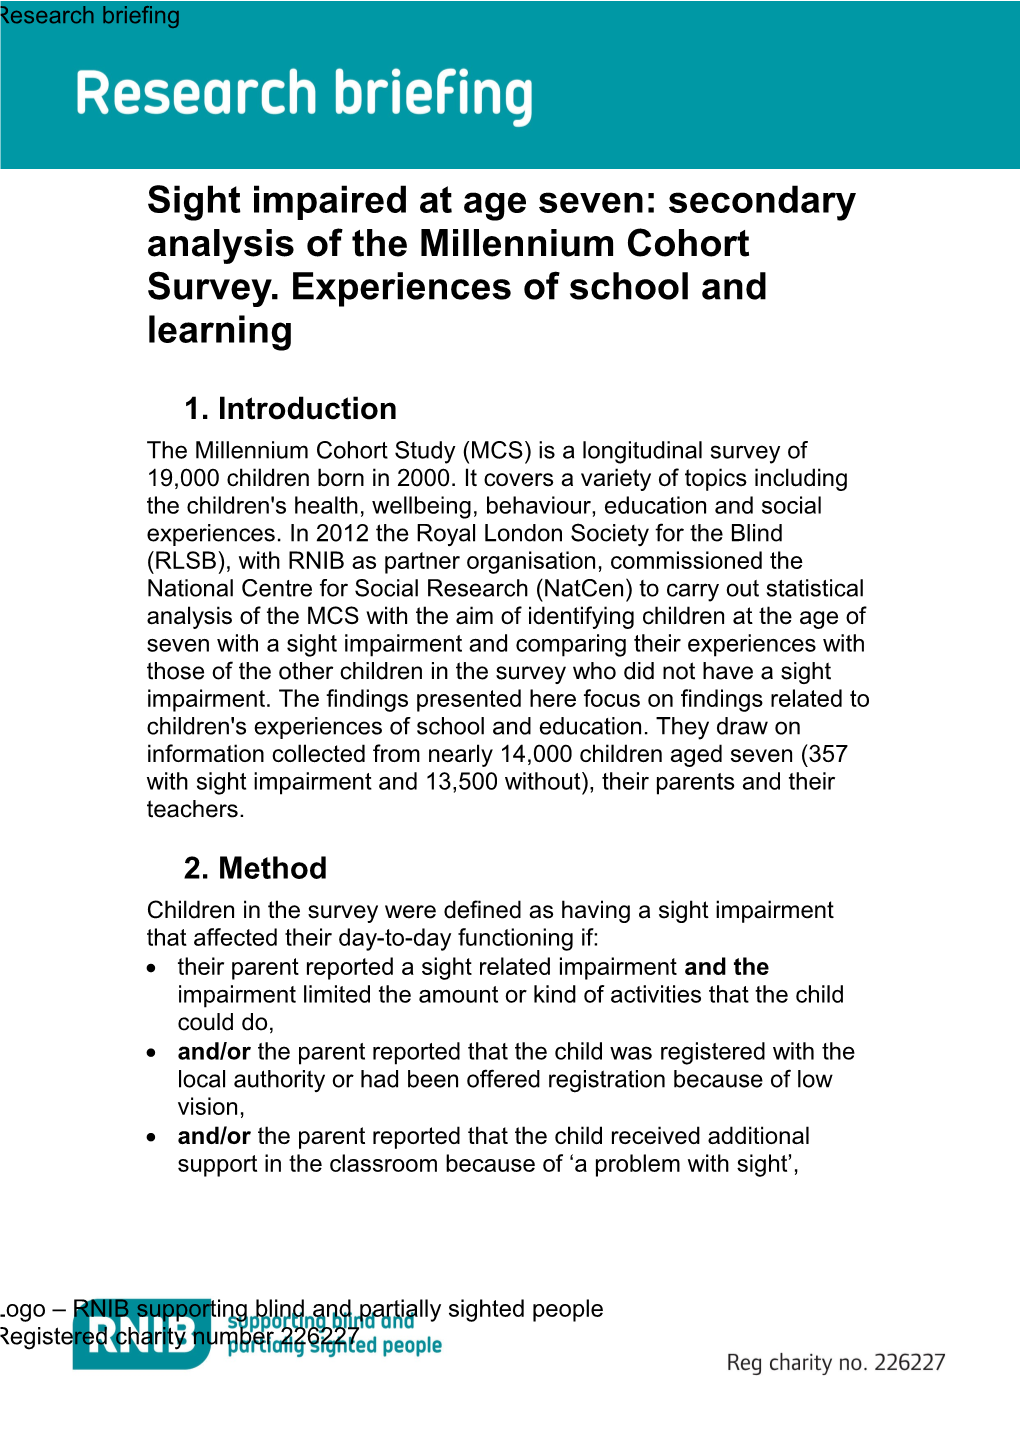 Sight Impaired at Age Seven: Secondary Analysis of the Millennium Cohort Survey. Experiences